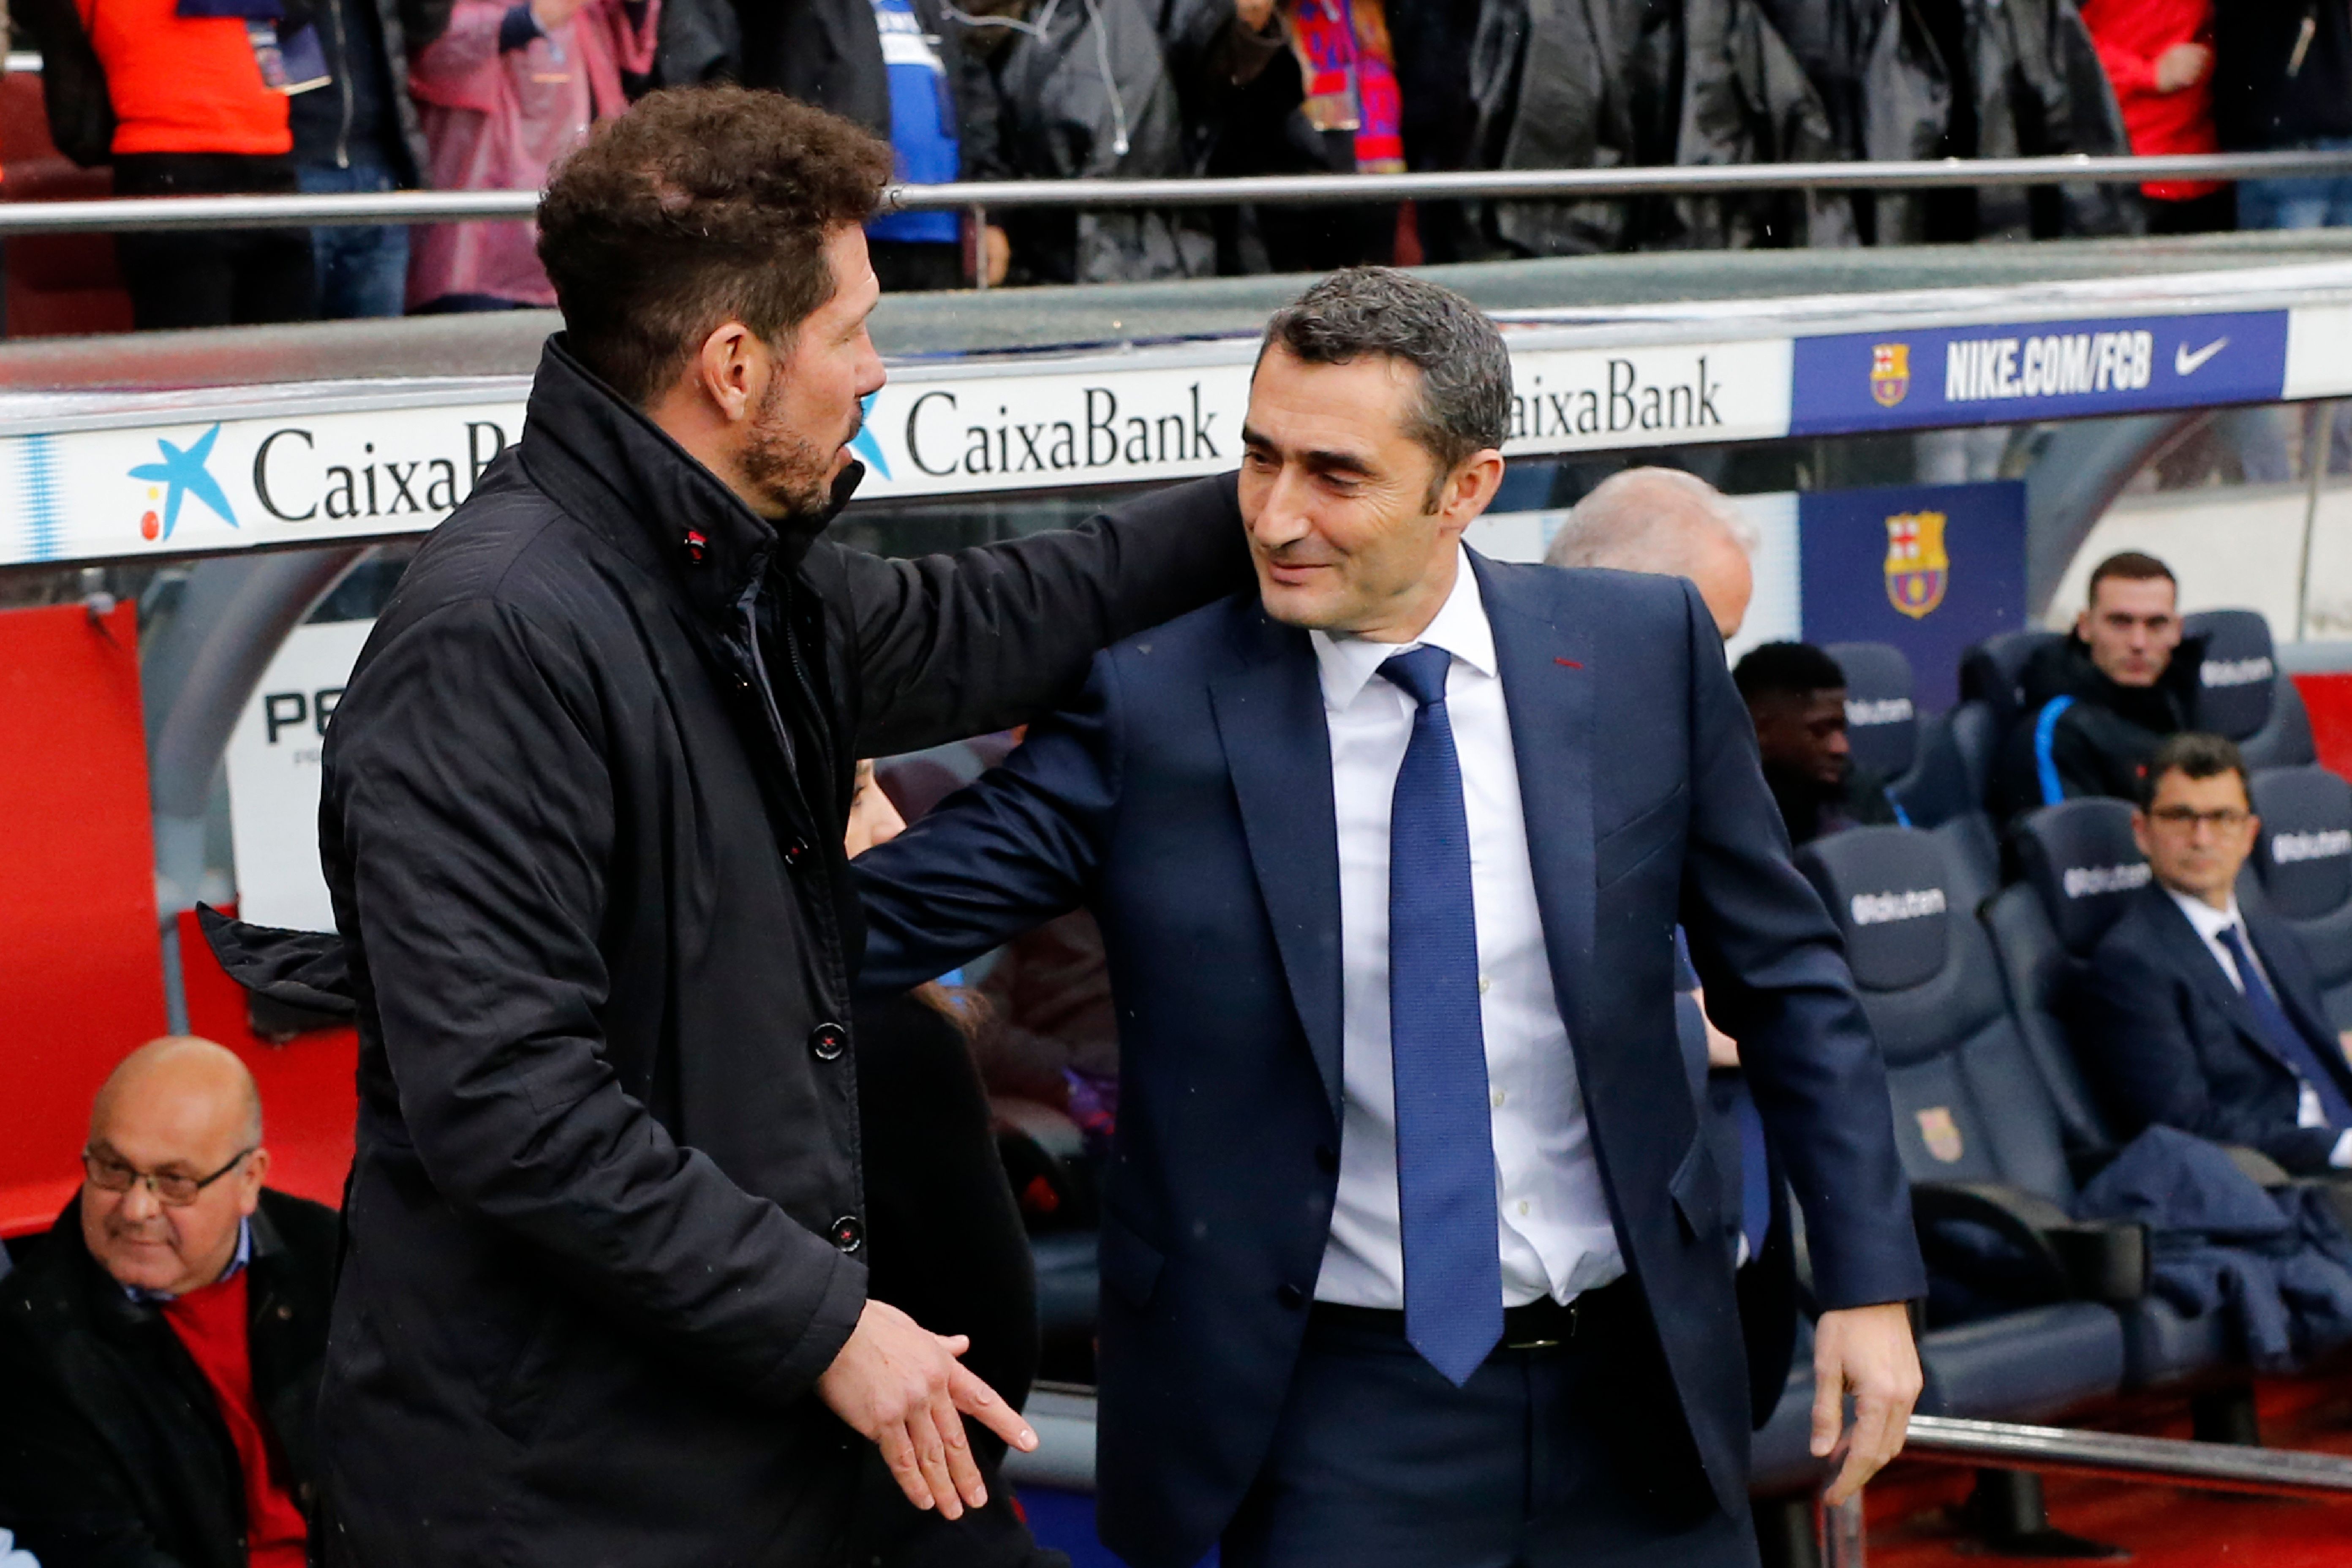 Atletico Madrid's Argentinian coach Diego Simeone (L) greets Barcelona's Spanish coach Ernesto Valverde before the Spanish league football match FC Barcelona against Club Atletico de Madrid at the Camp Nou stadium in Barcelona on March 04, 2018. / AFP PHOTO / Pau Barrena        (Photo credit should read PAU BARRENA/AFP/Getty Images)